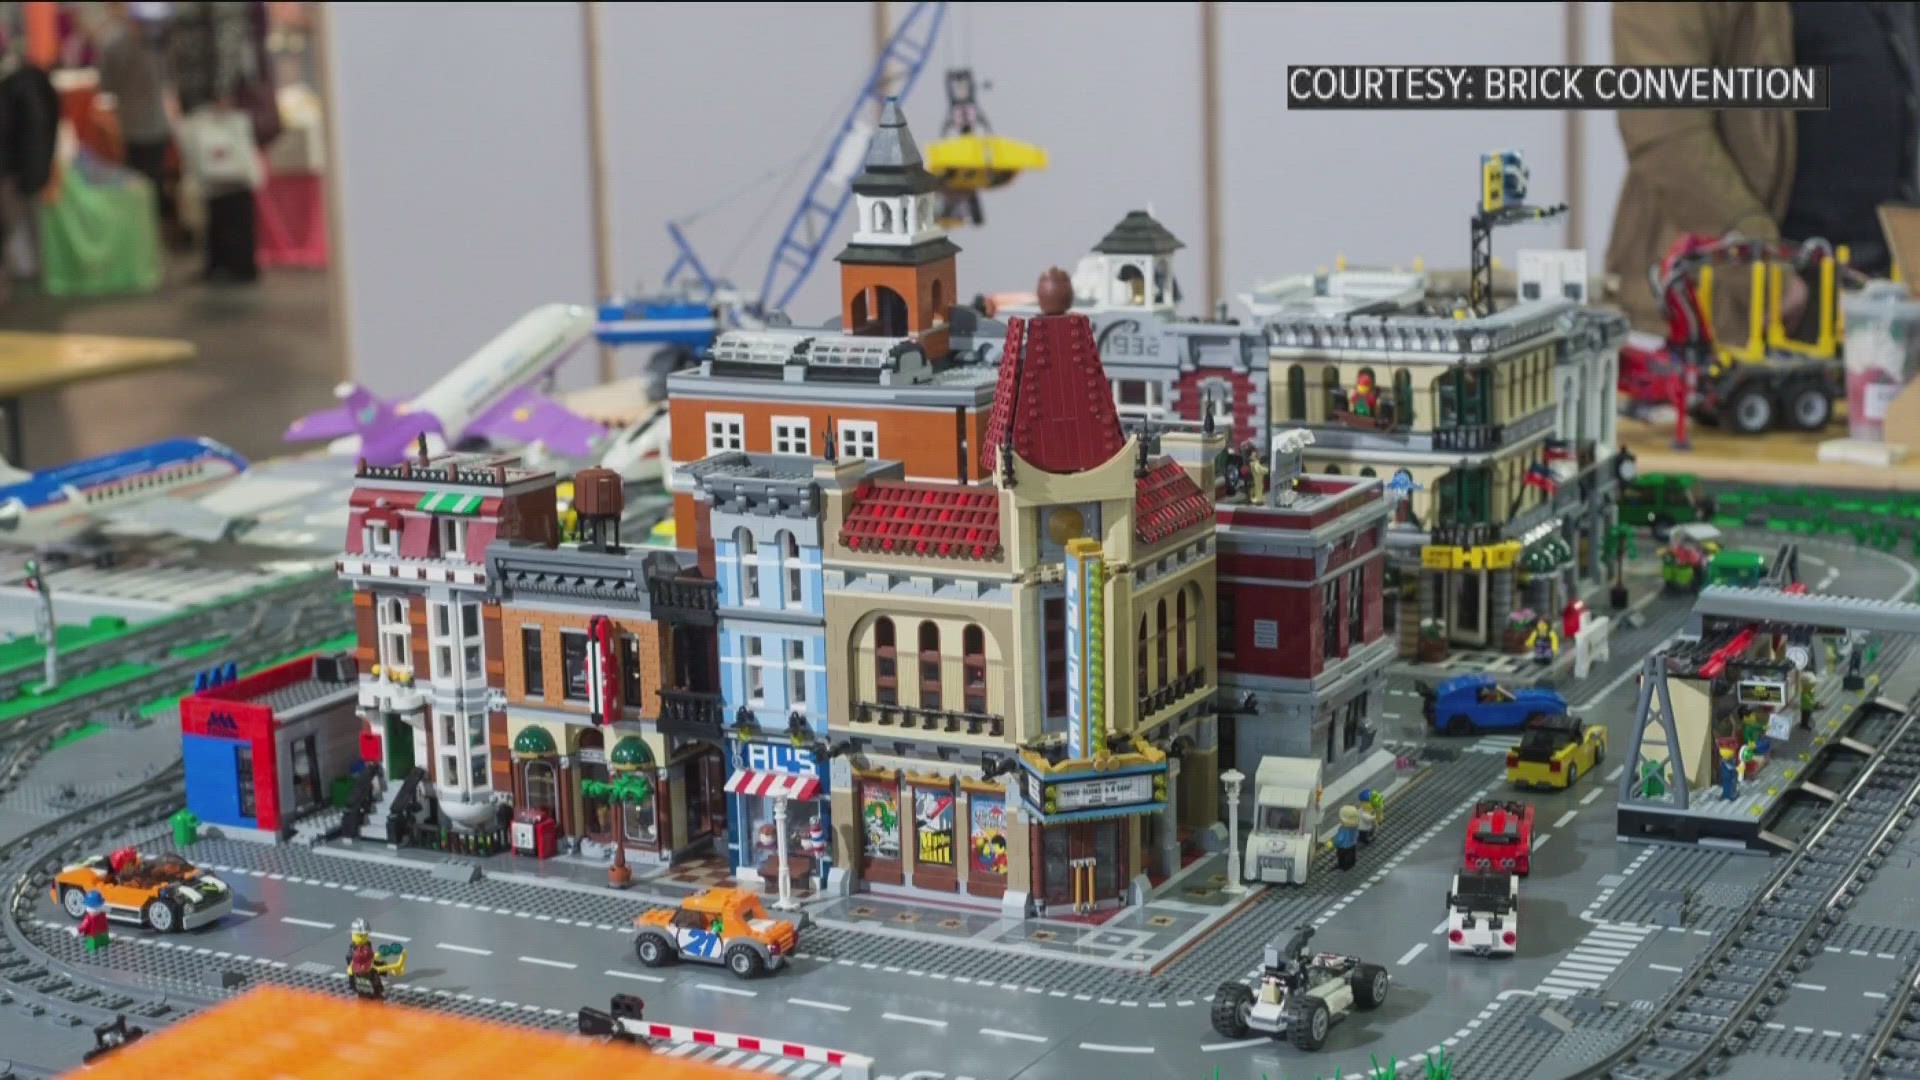 Professional LEGO artists from around the United States will be in town to show off their elaborate creations.